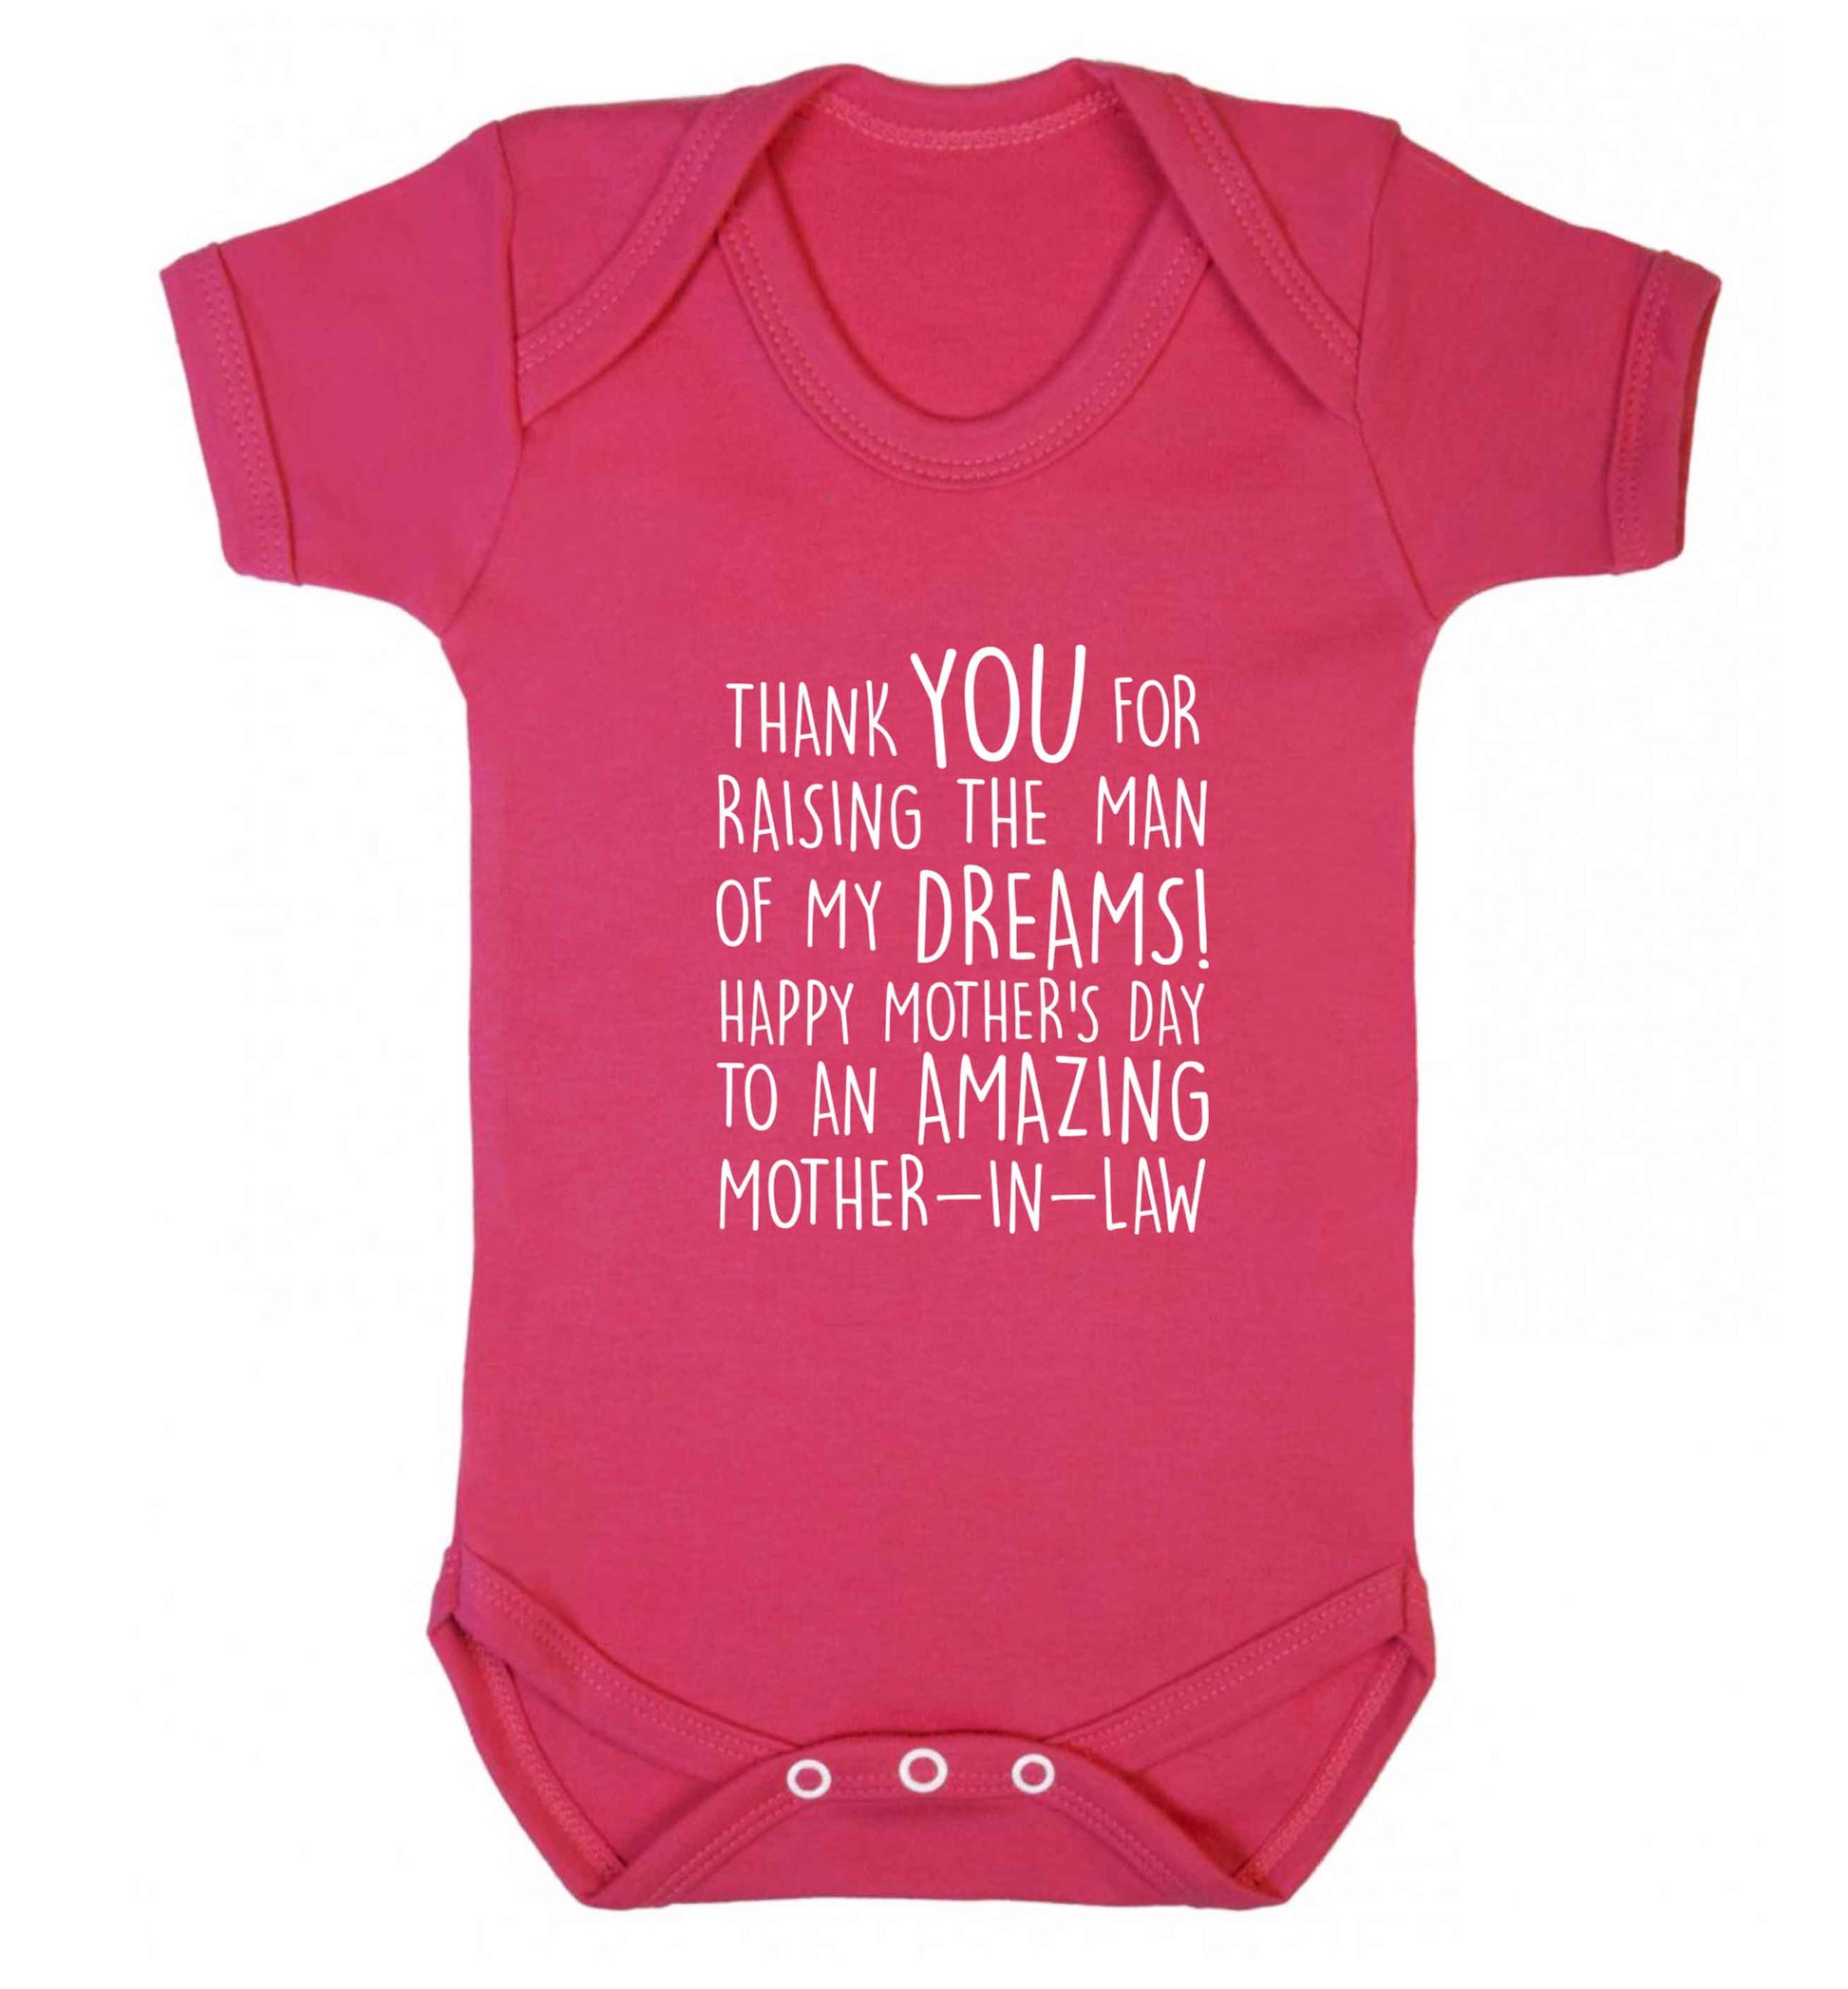 Raising the man of my dreams mother's day mother-in-law baby vest dark pink 18-24 months